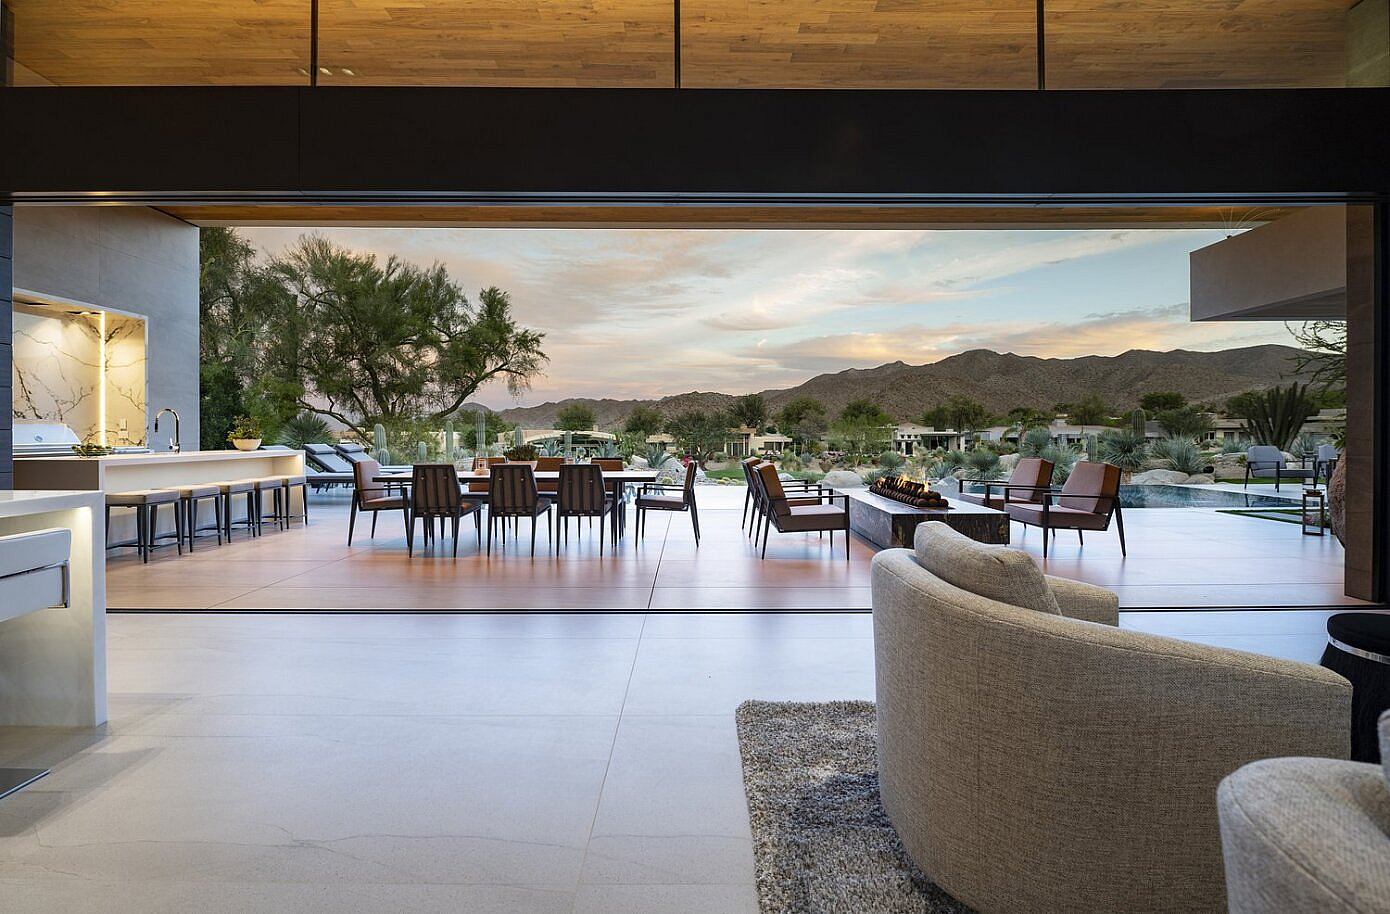 BigHorn by Whipple Russell Architects